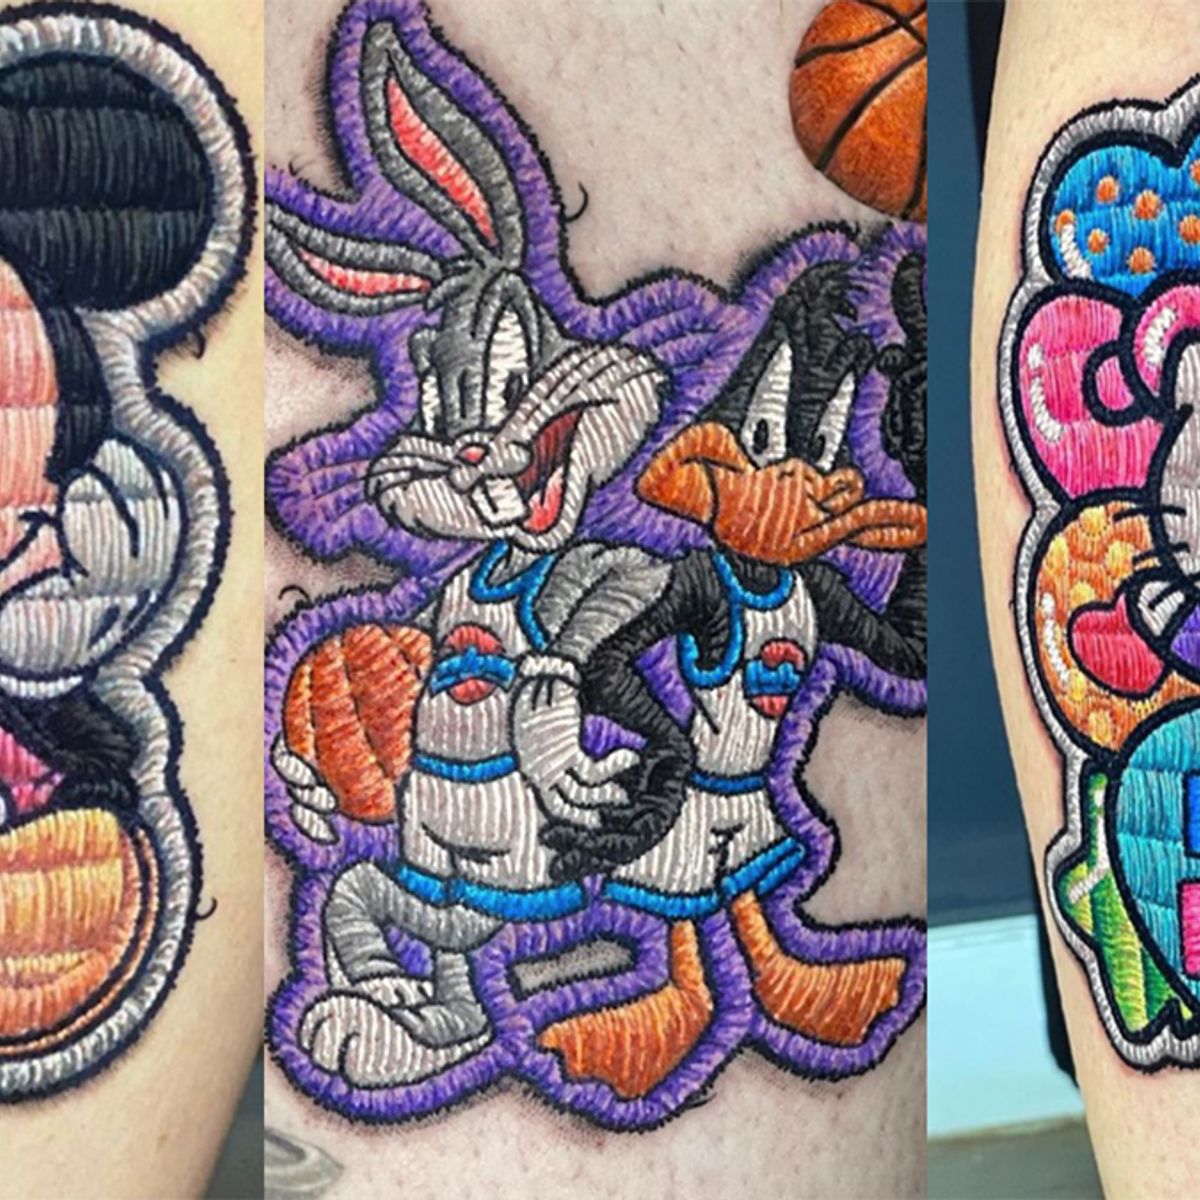 Yes, a Video Accurately Depicts 'Embroidery Tattoos'